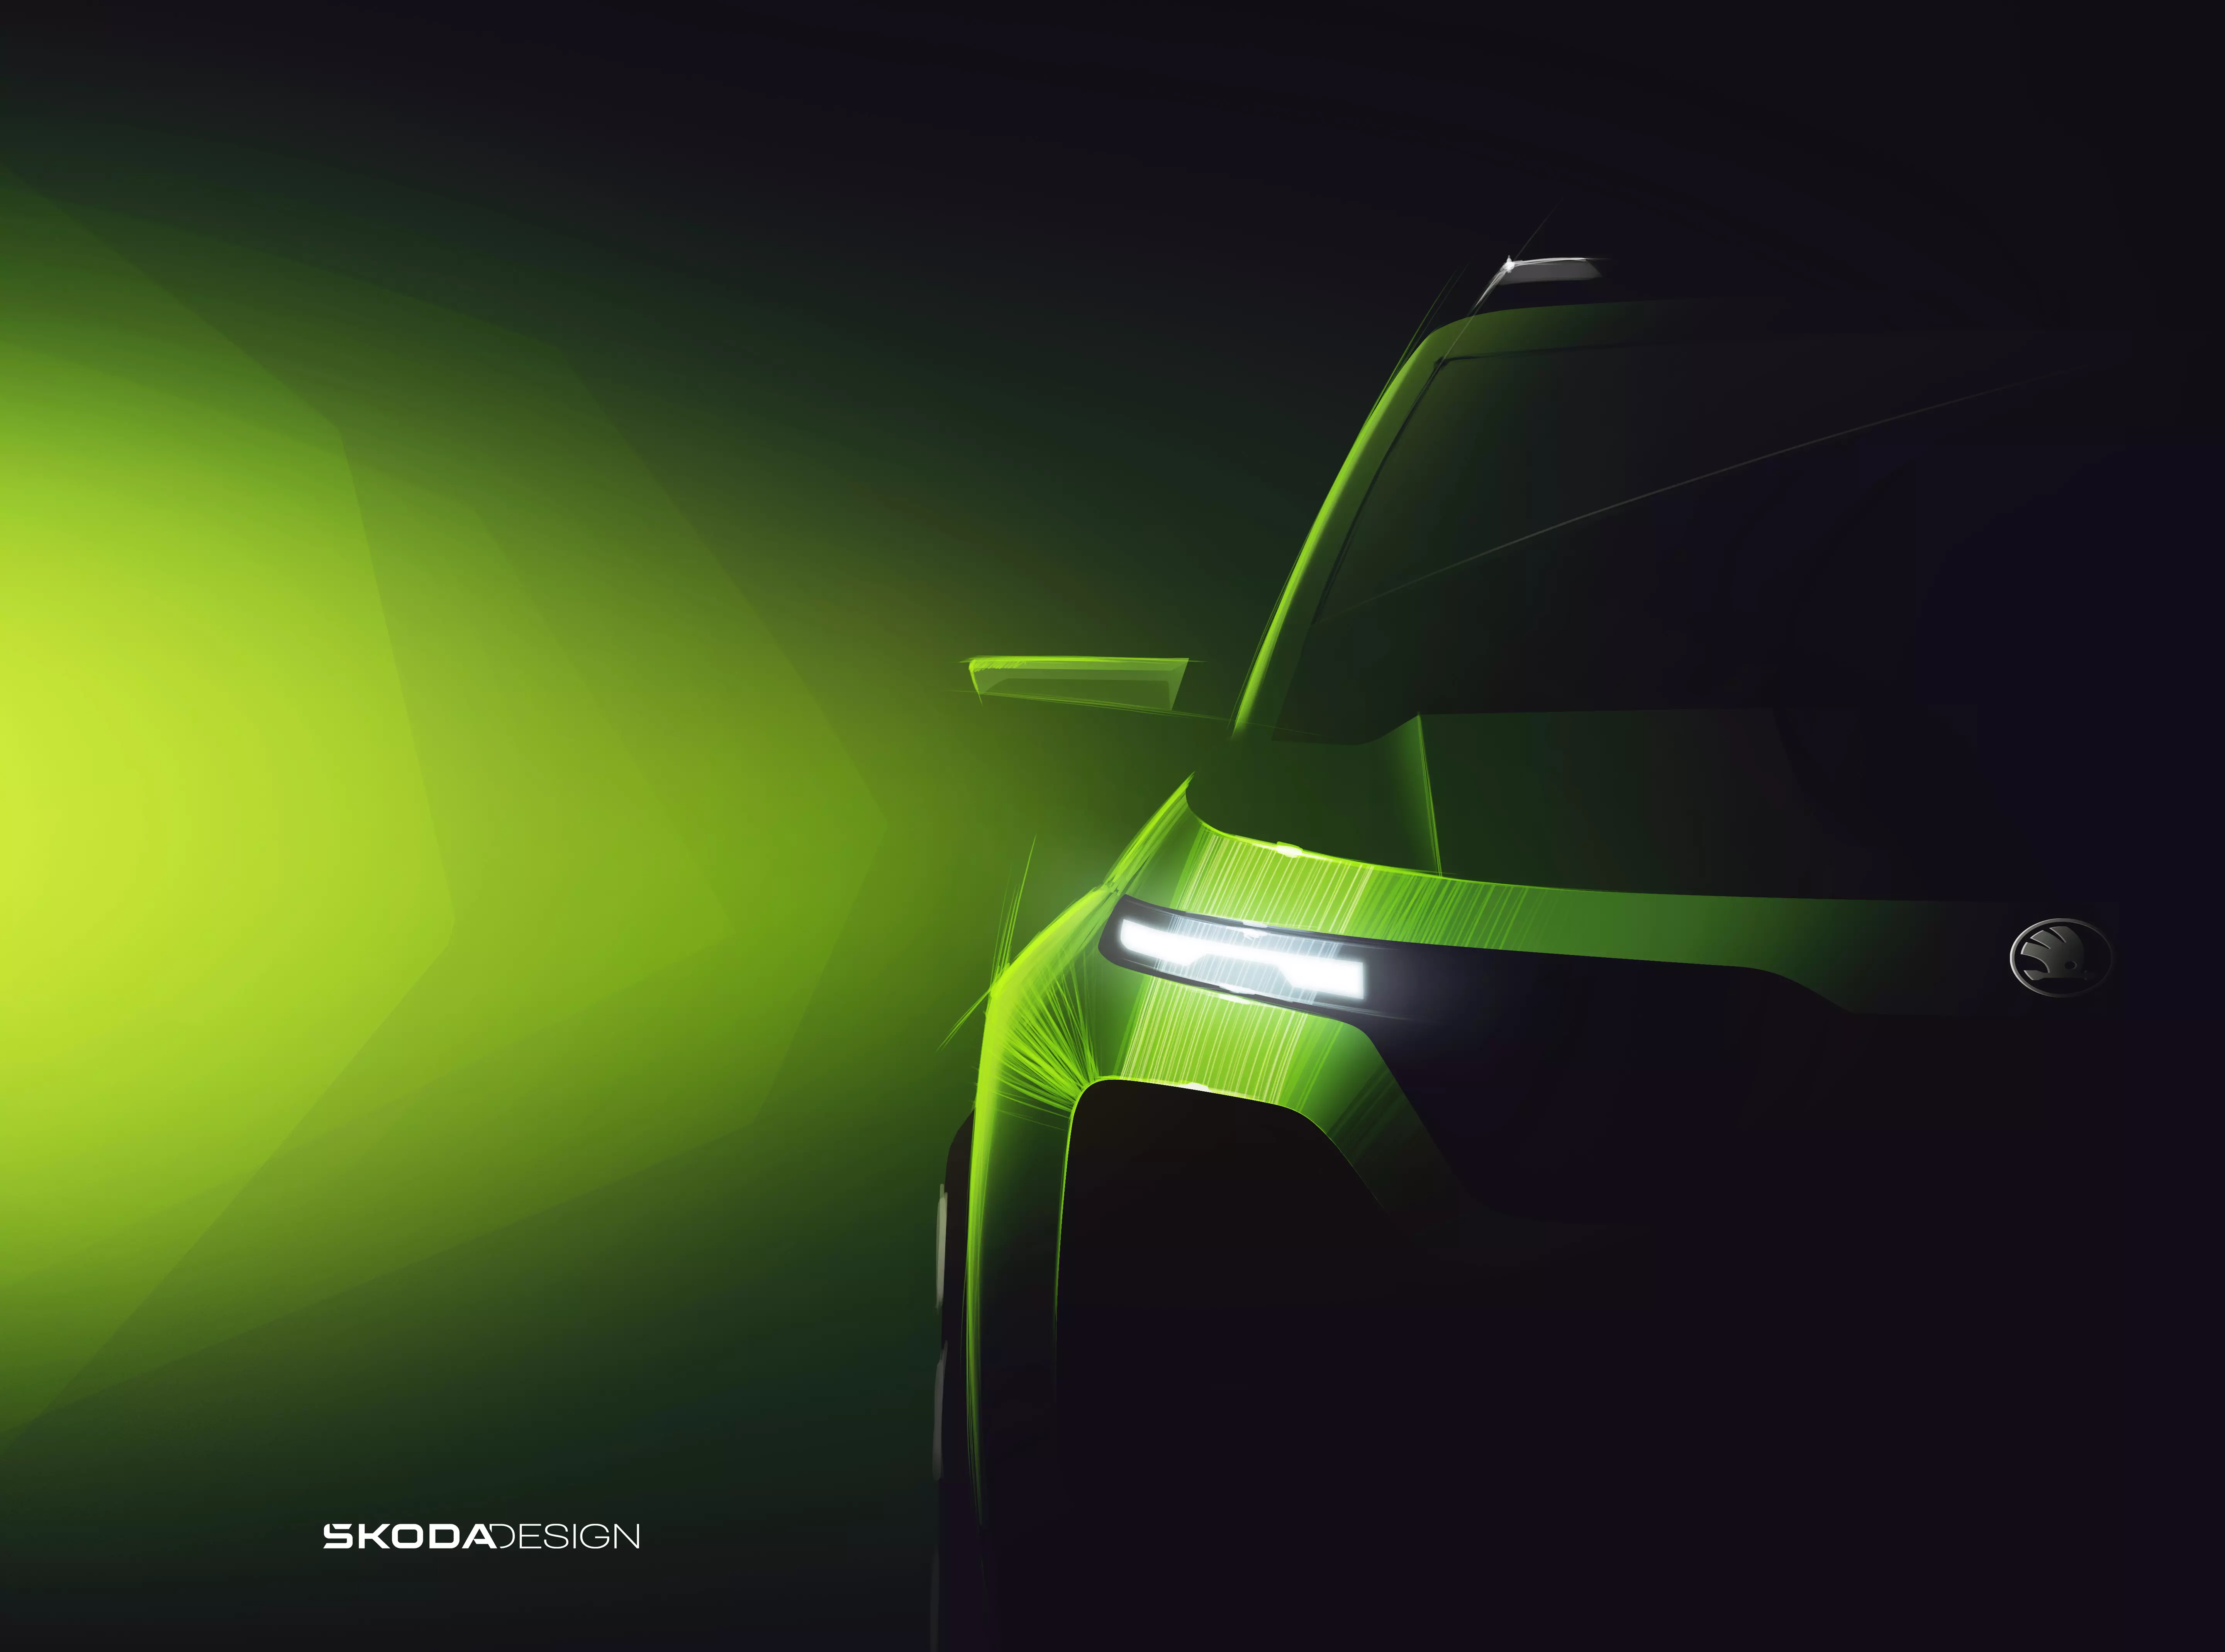 Skoda to expand its base with compact SUV launch in 2025